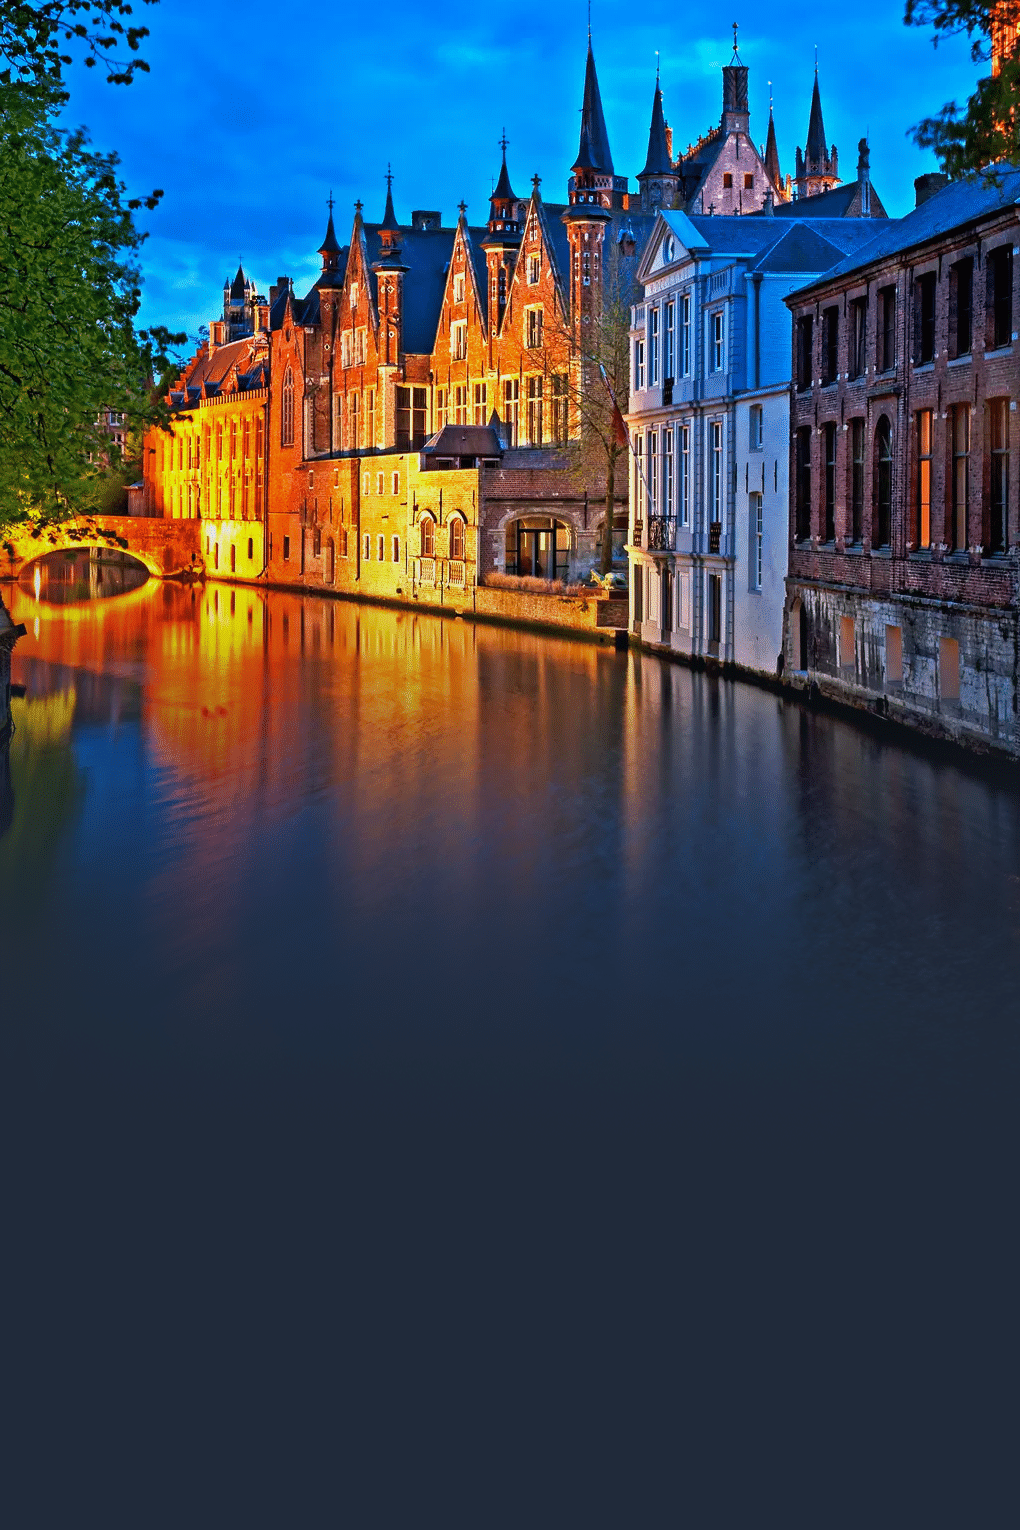 Brussels, Bruges and Beach